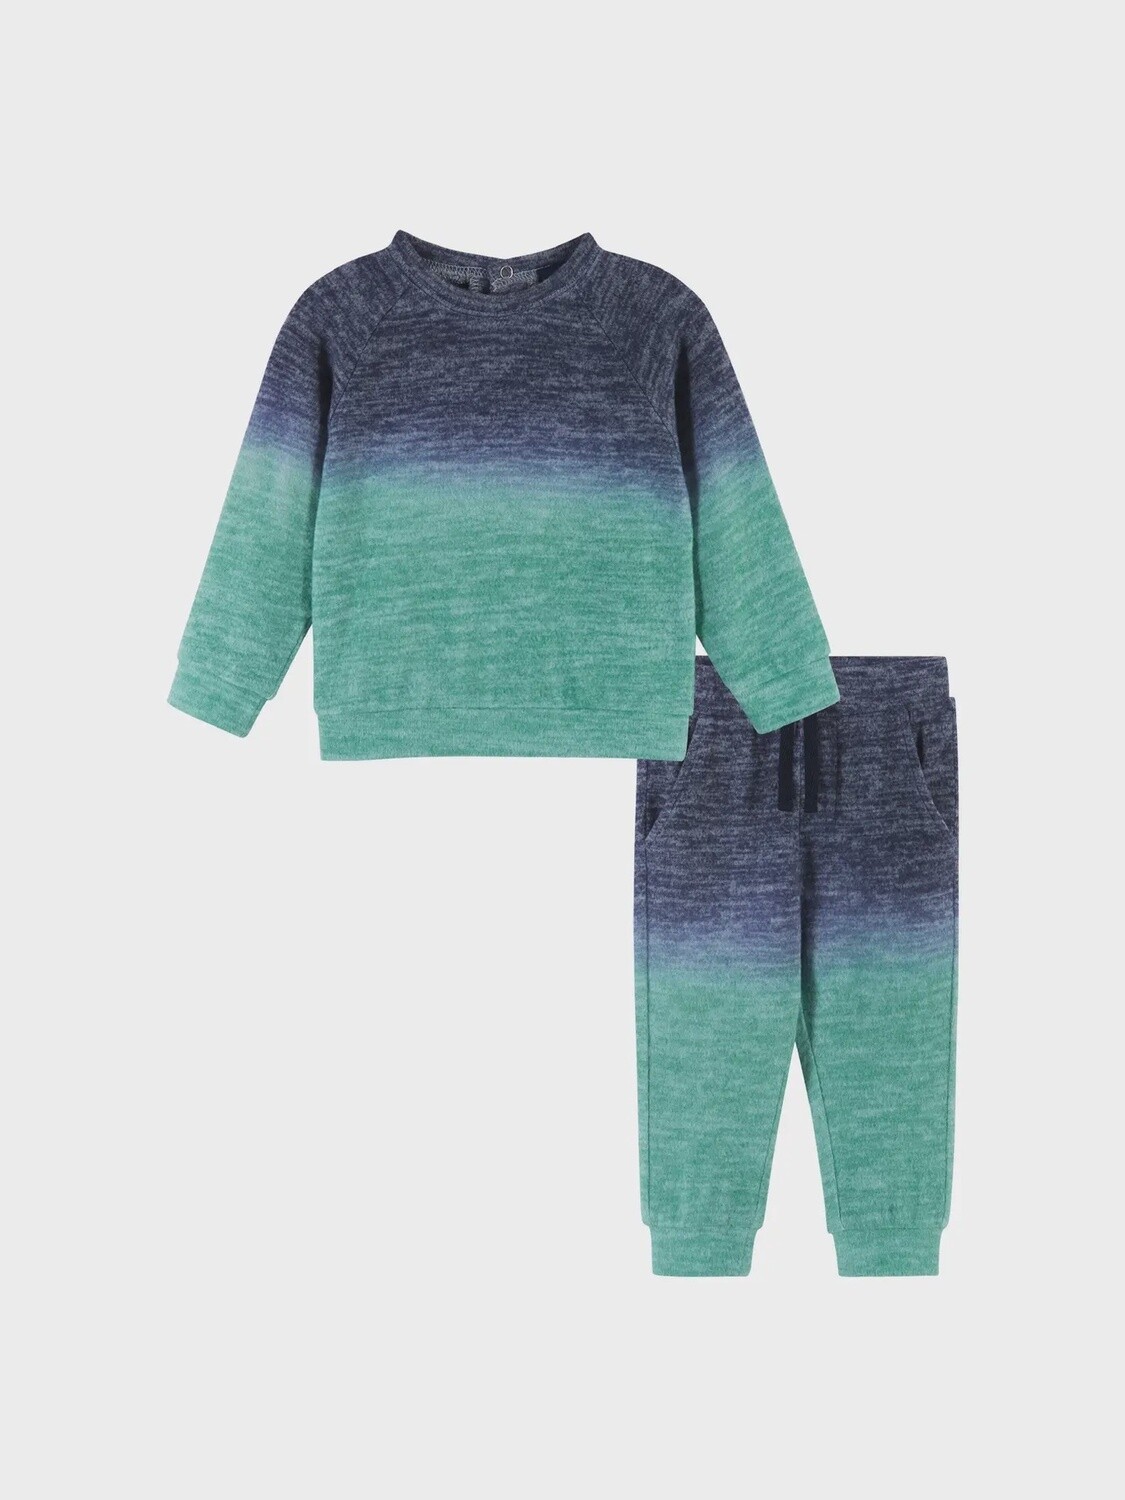 Andy and Evan’s ombré set